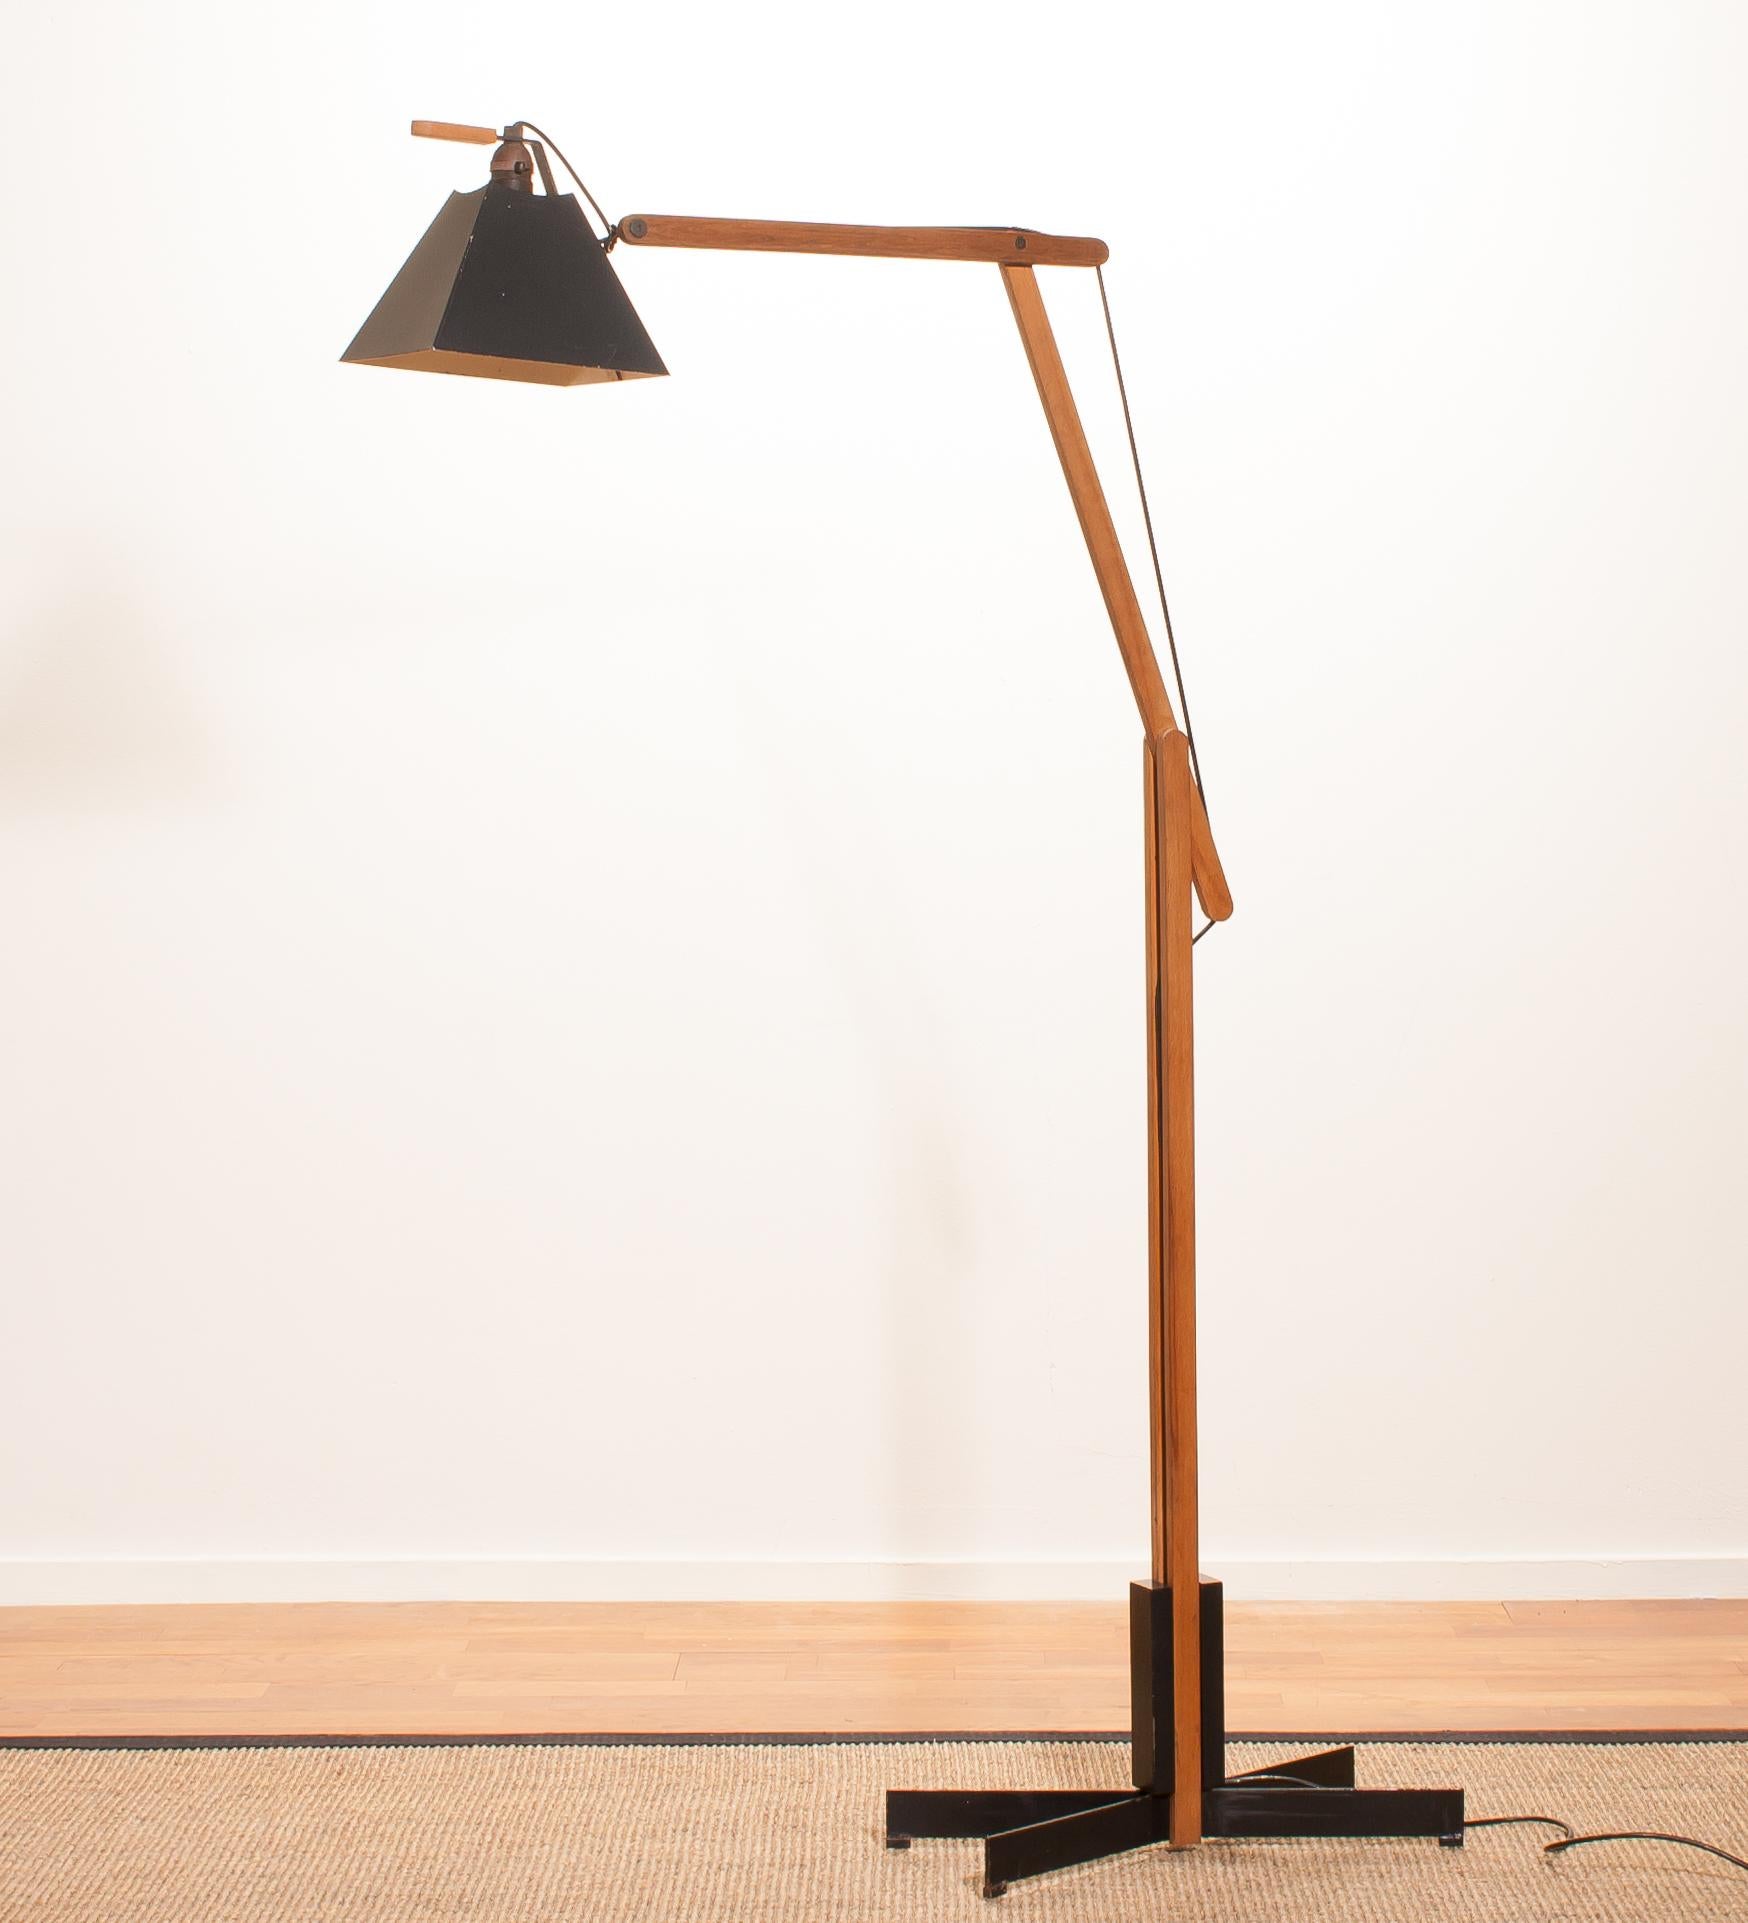 Magnificent rare floor lamp by Luxus, Sweden.
This lamp is adjustable by a counterbalance.
The Stand is made of teak with a black lacquered shade.
It is labelled by Luxus and in a beautiful condition.
Period 1950s.
Dimensions: H 125 cm, D 90